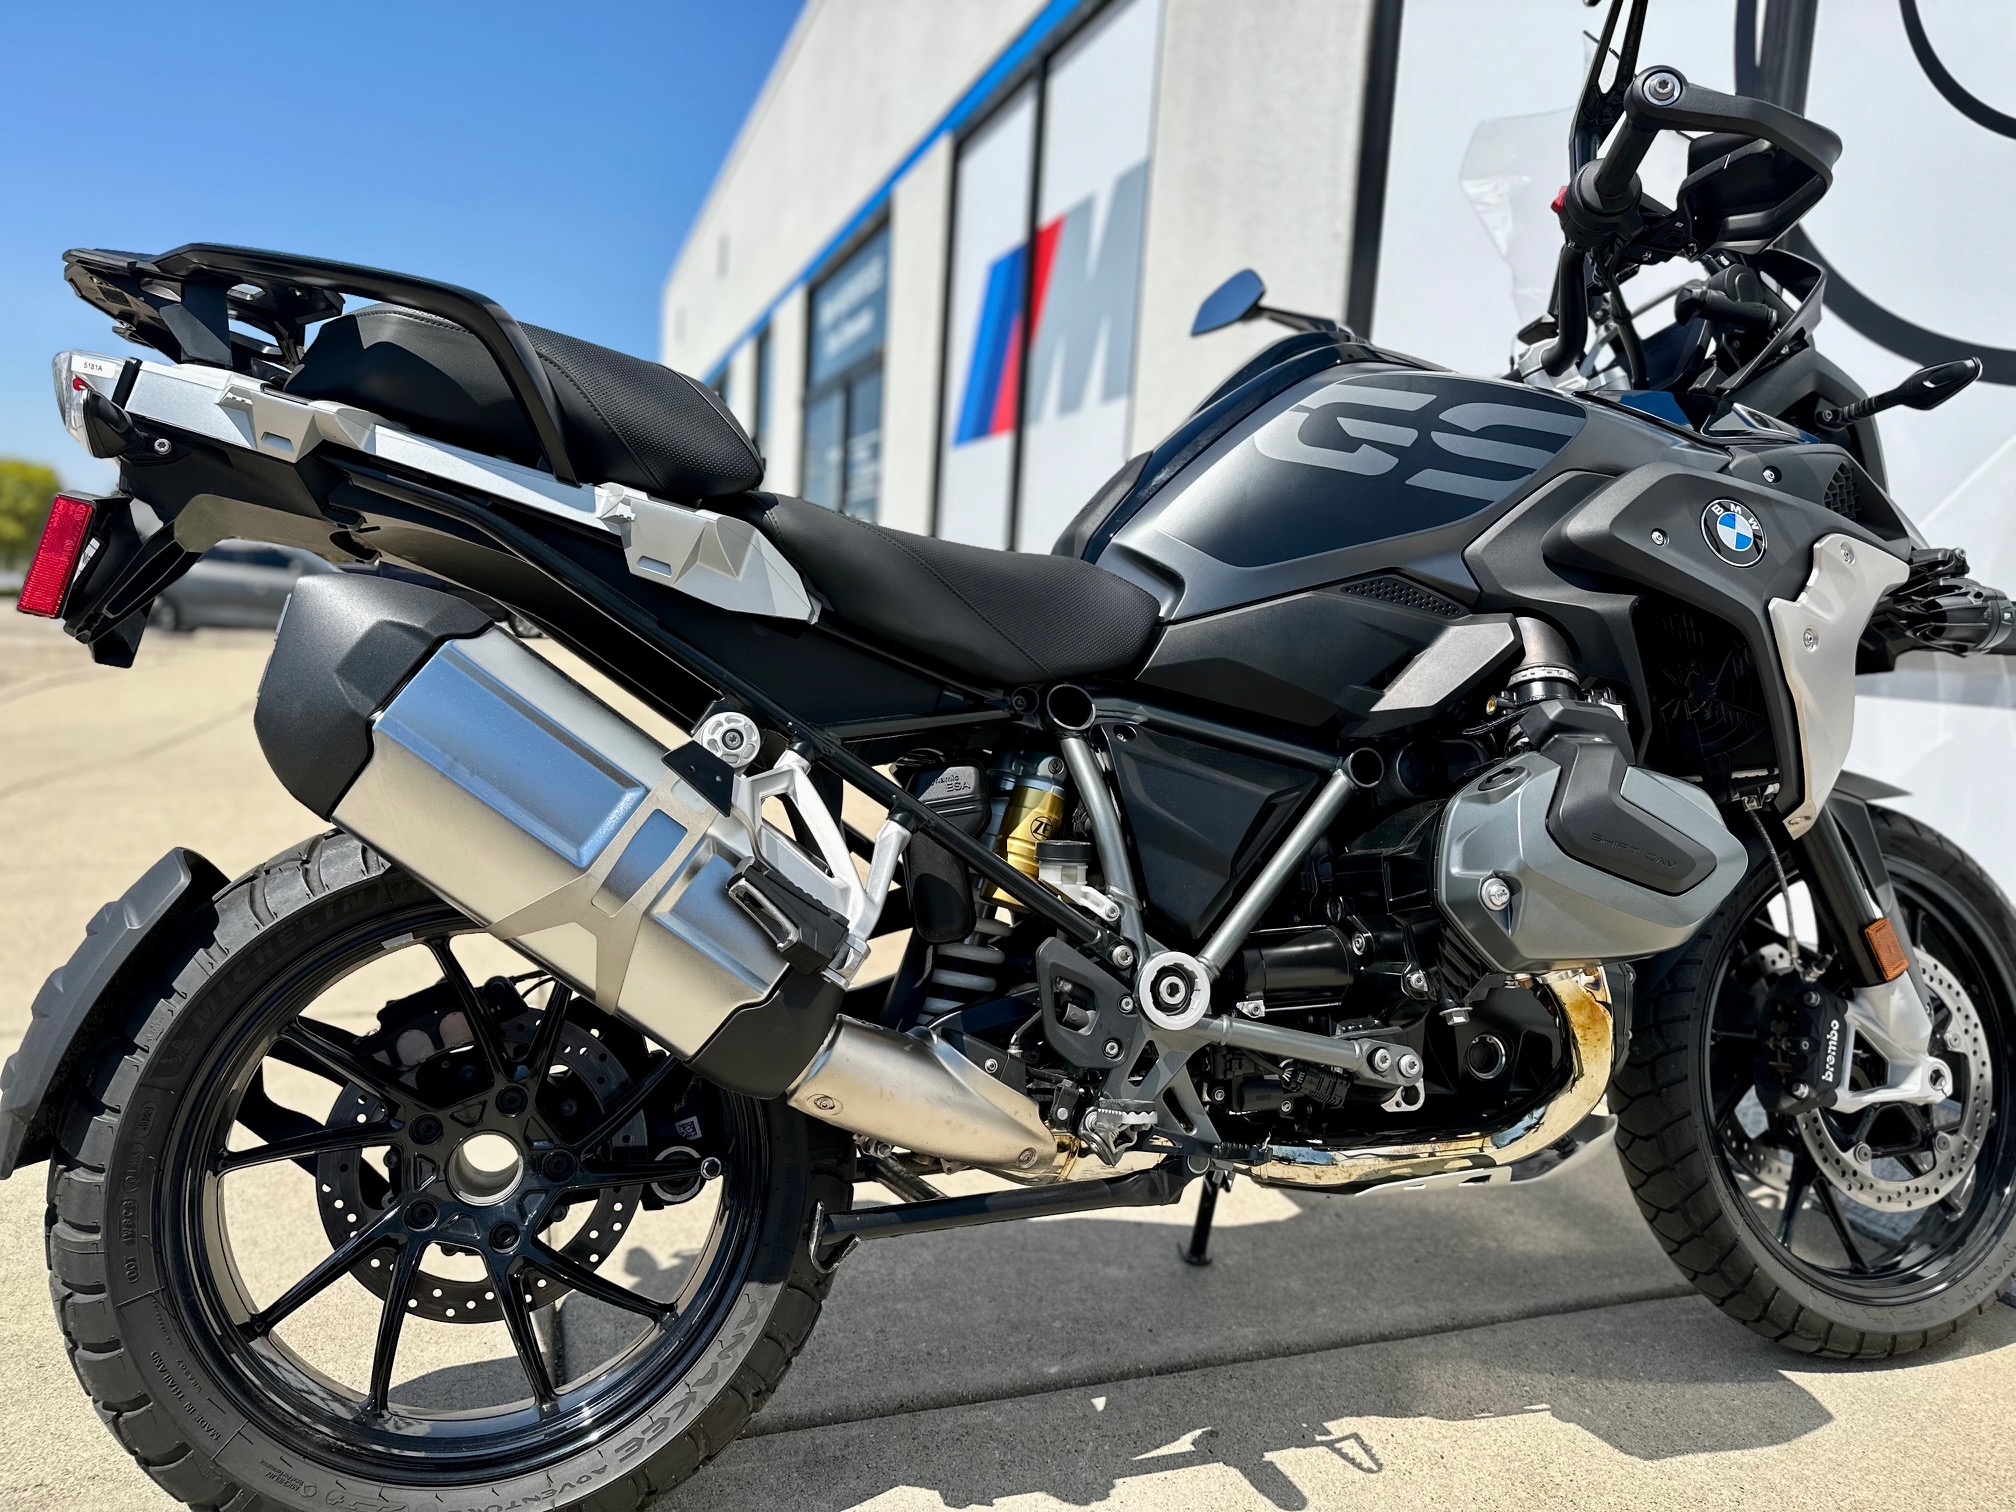 BMW R 1250 GS Accessories: 5 Must Haves – Lone Rider